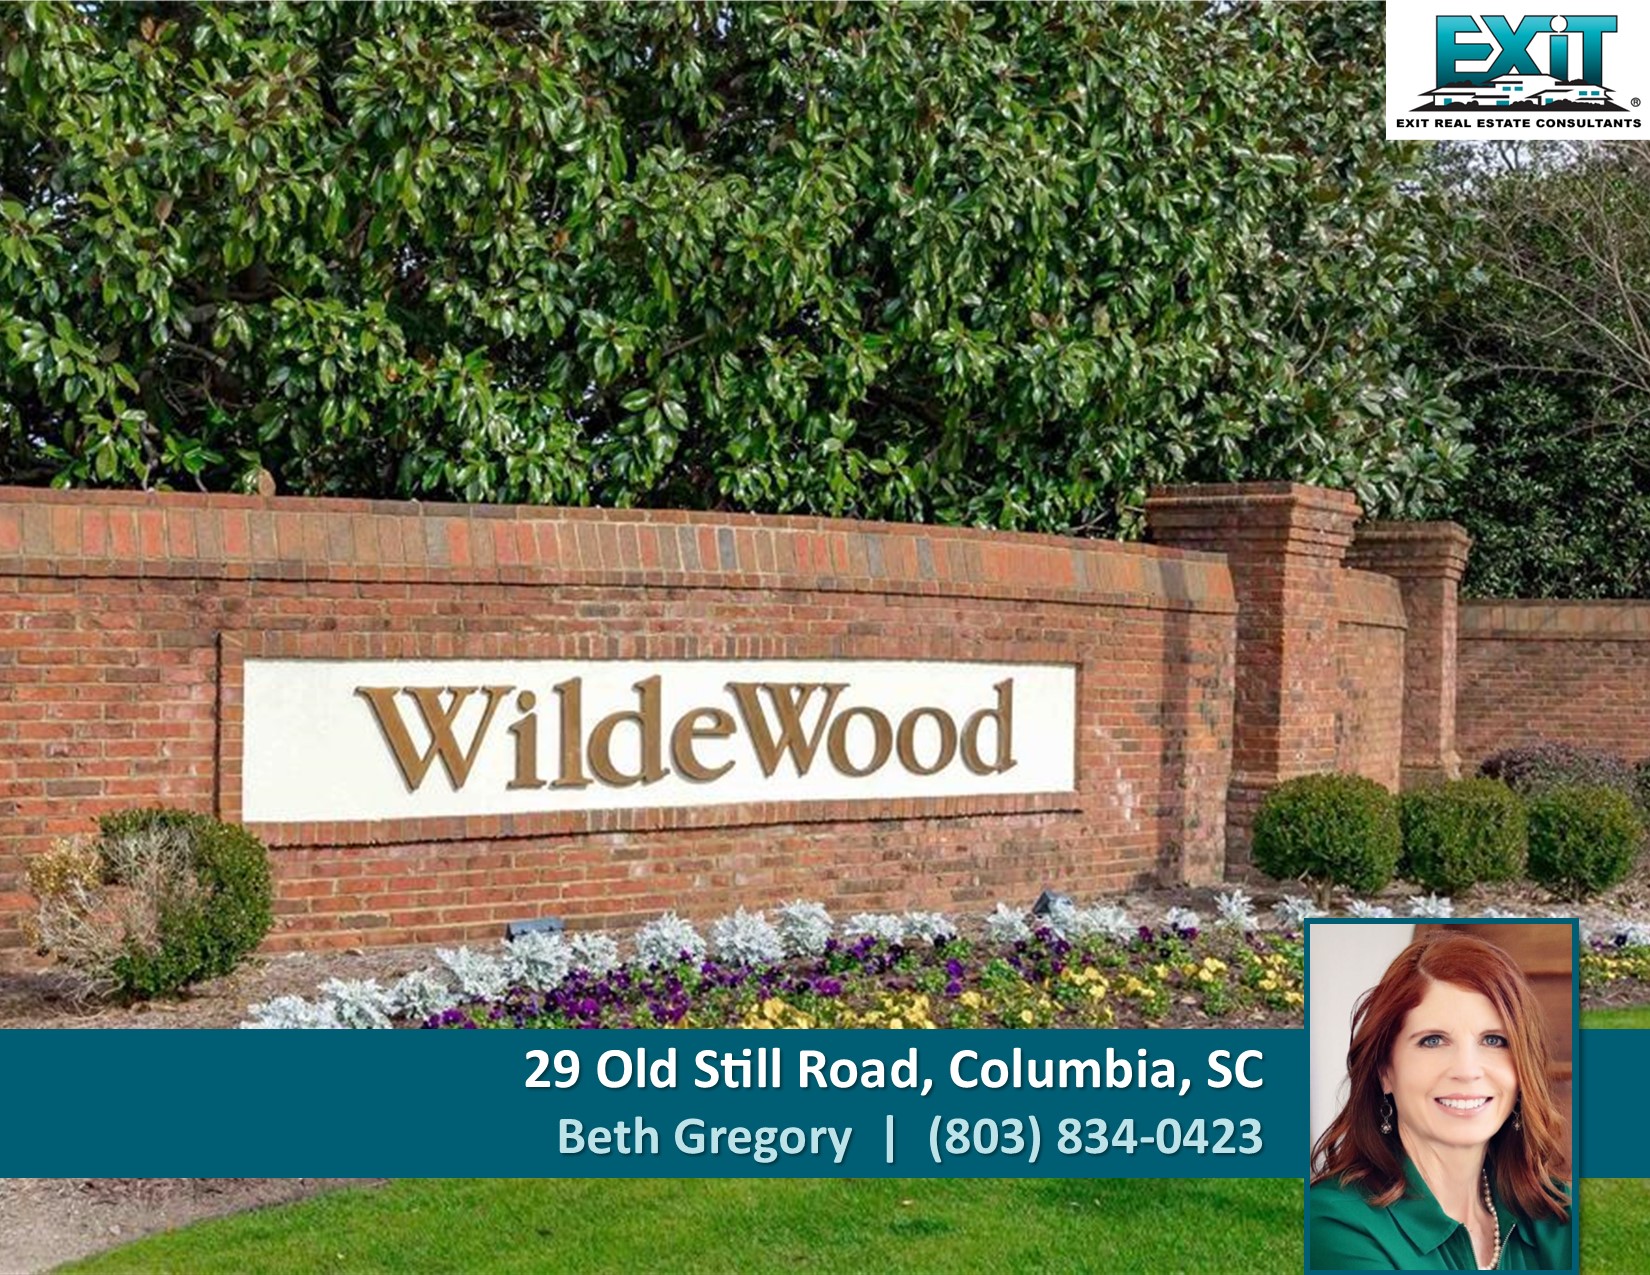 Just listed in Wildewood